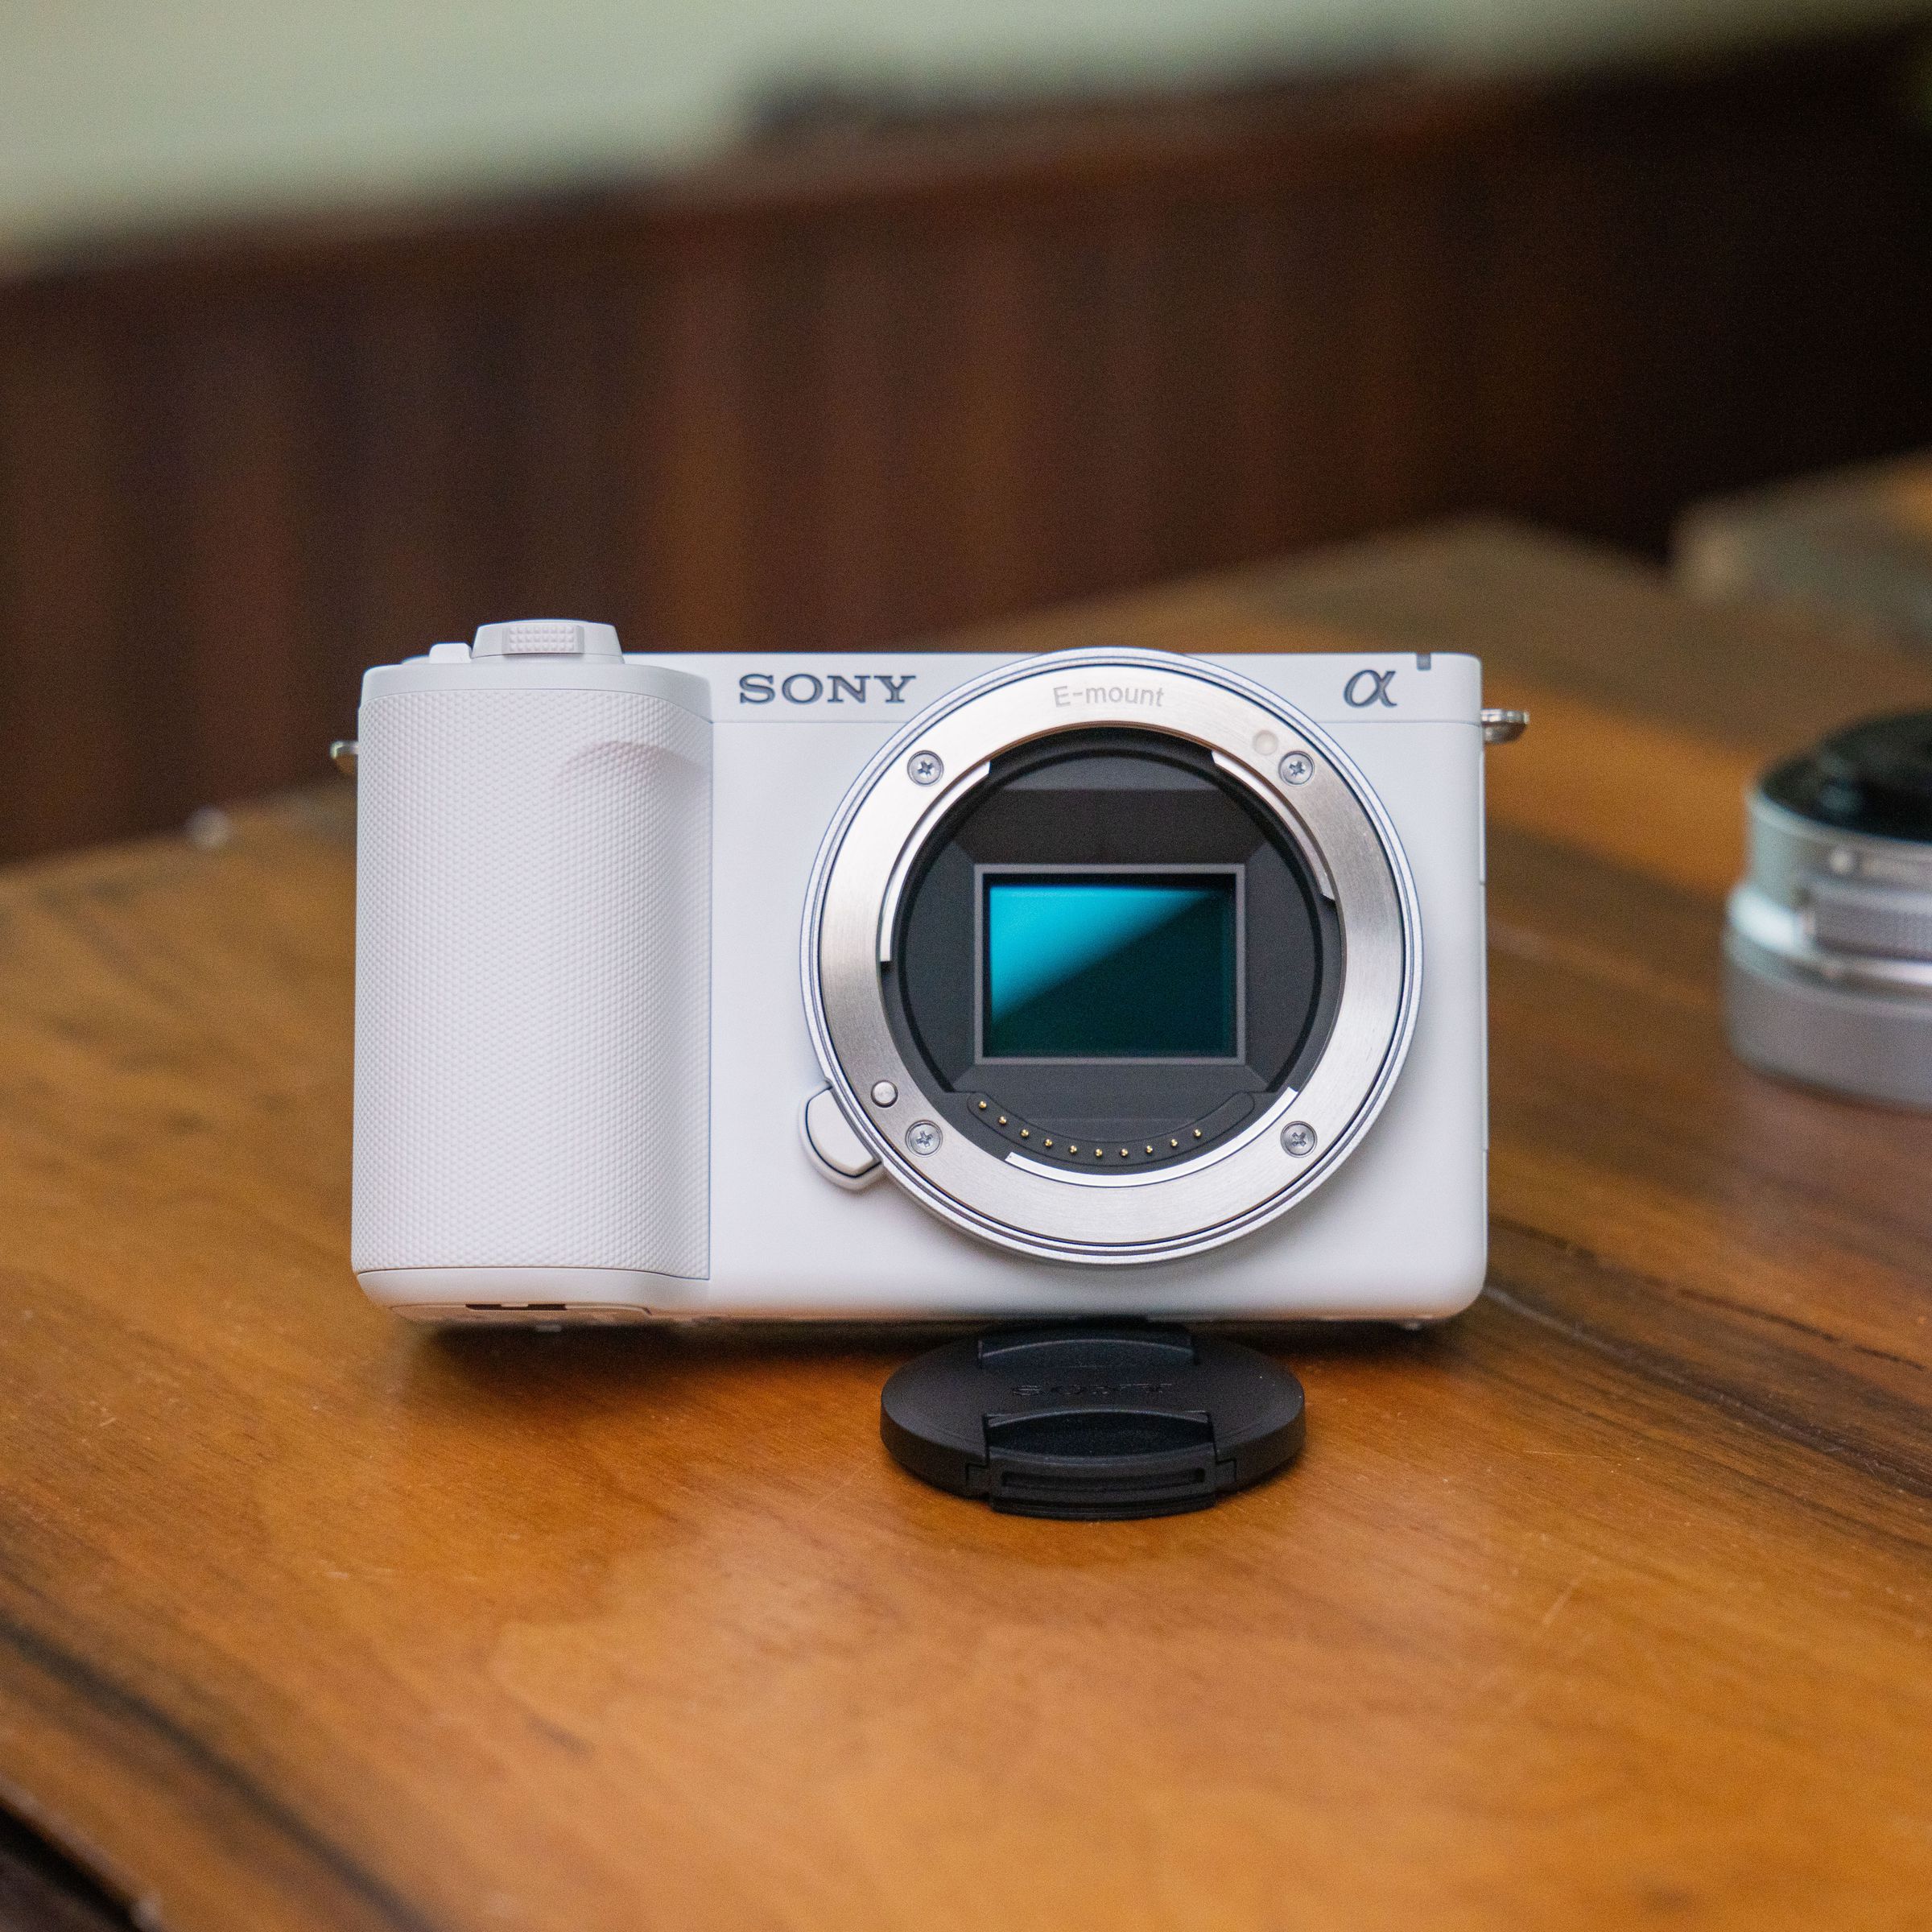 The Sony ZV-E10 II in white, sitting on a table with its lens detached.